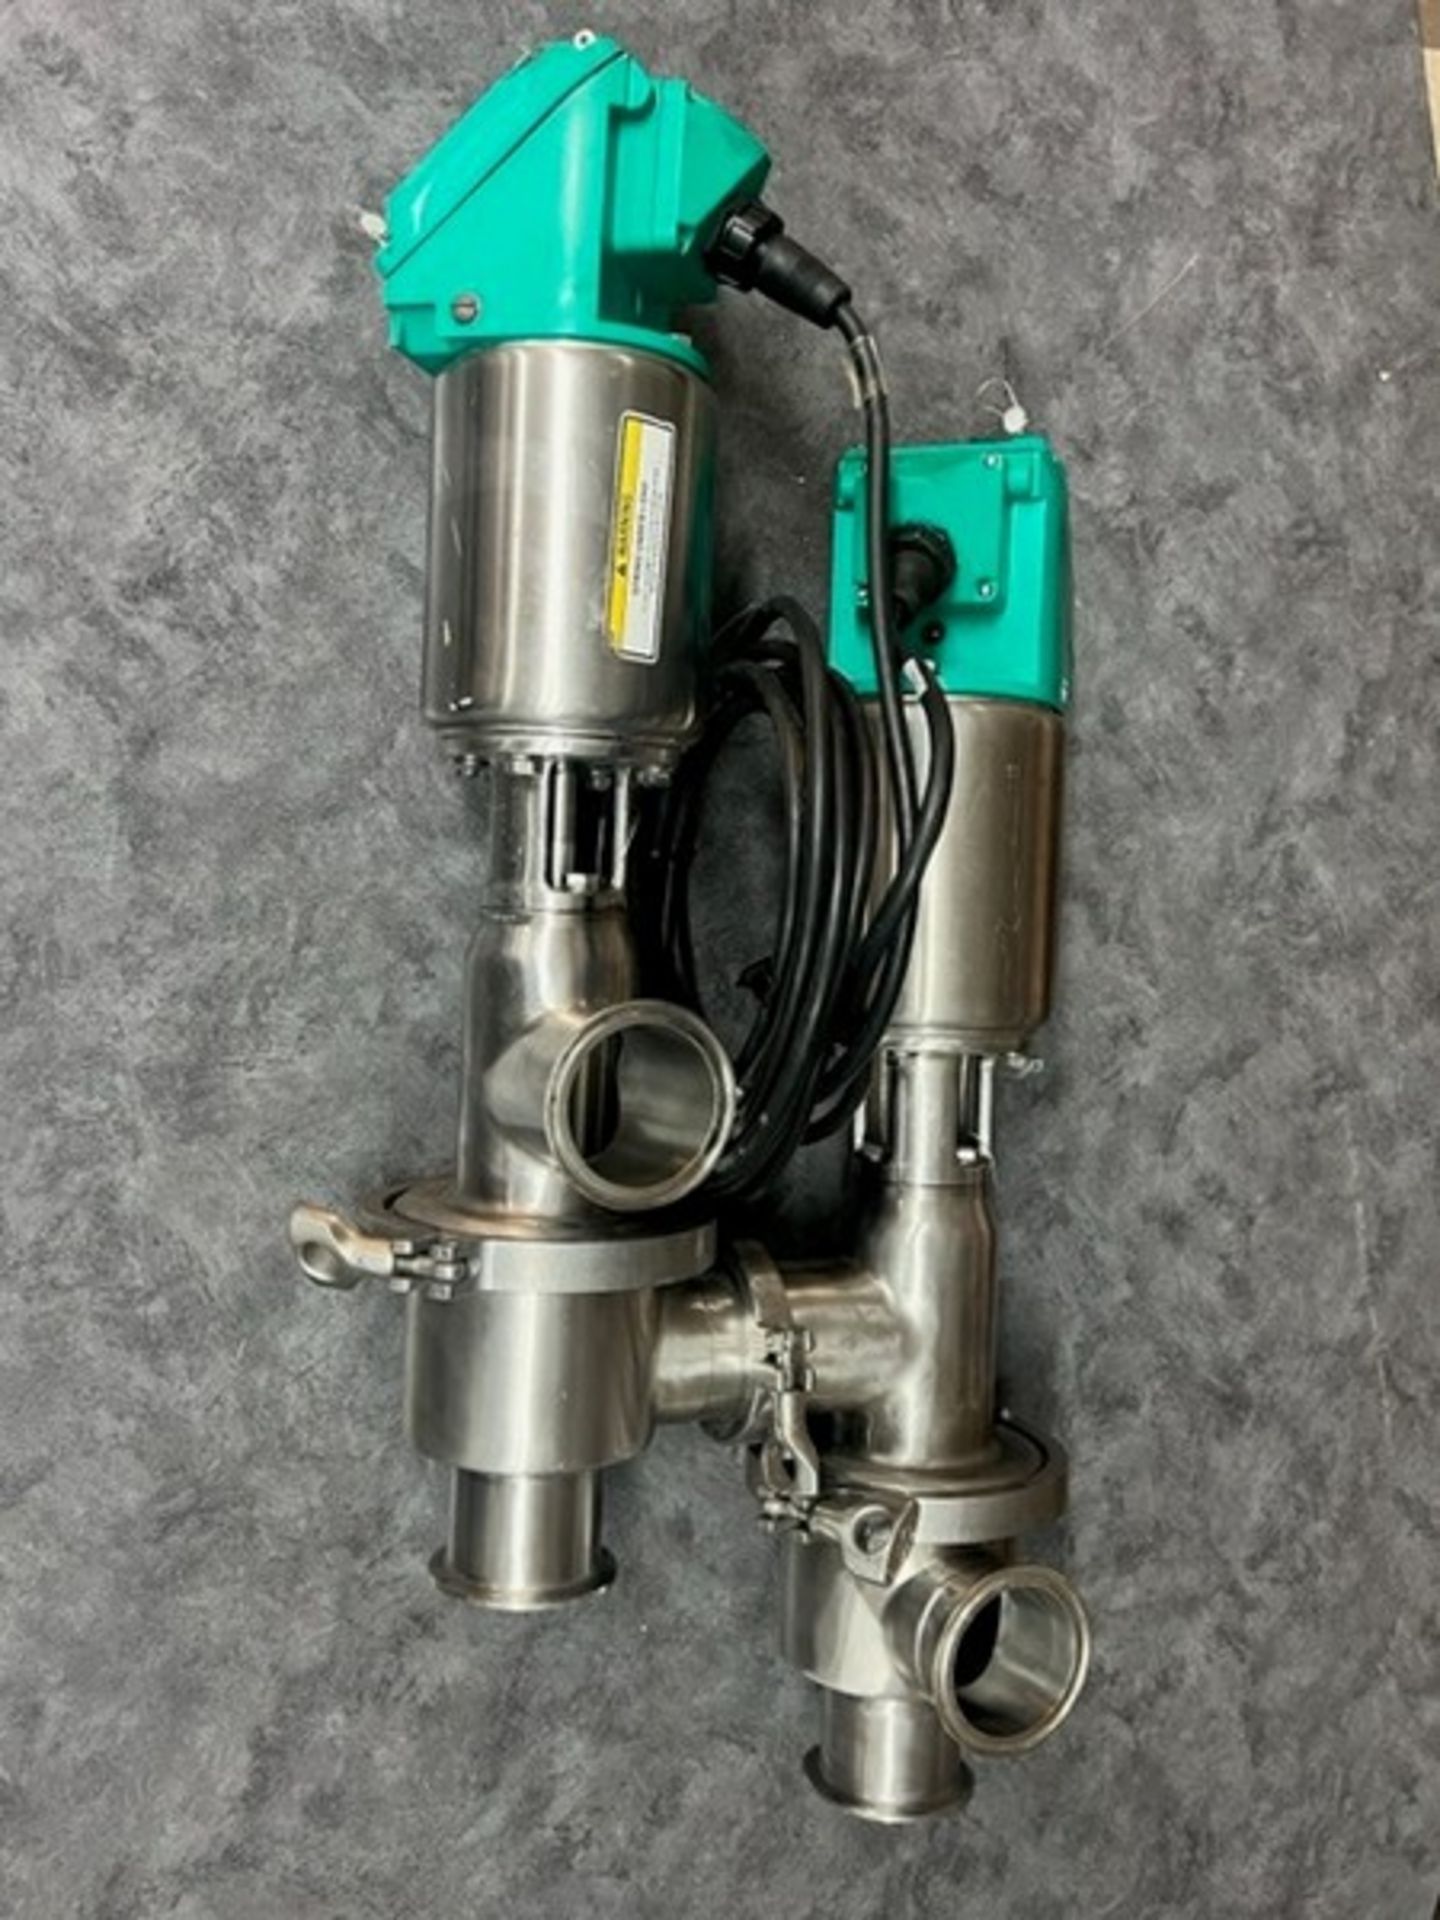 Tri-Clover 2.5 inch Stainless Diversion Set with Teflon Stem, Model 762 including Legal Control - Image 4 of 7